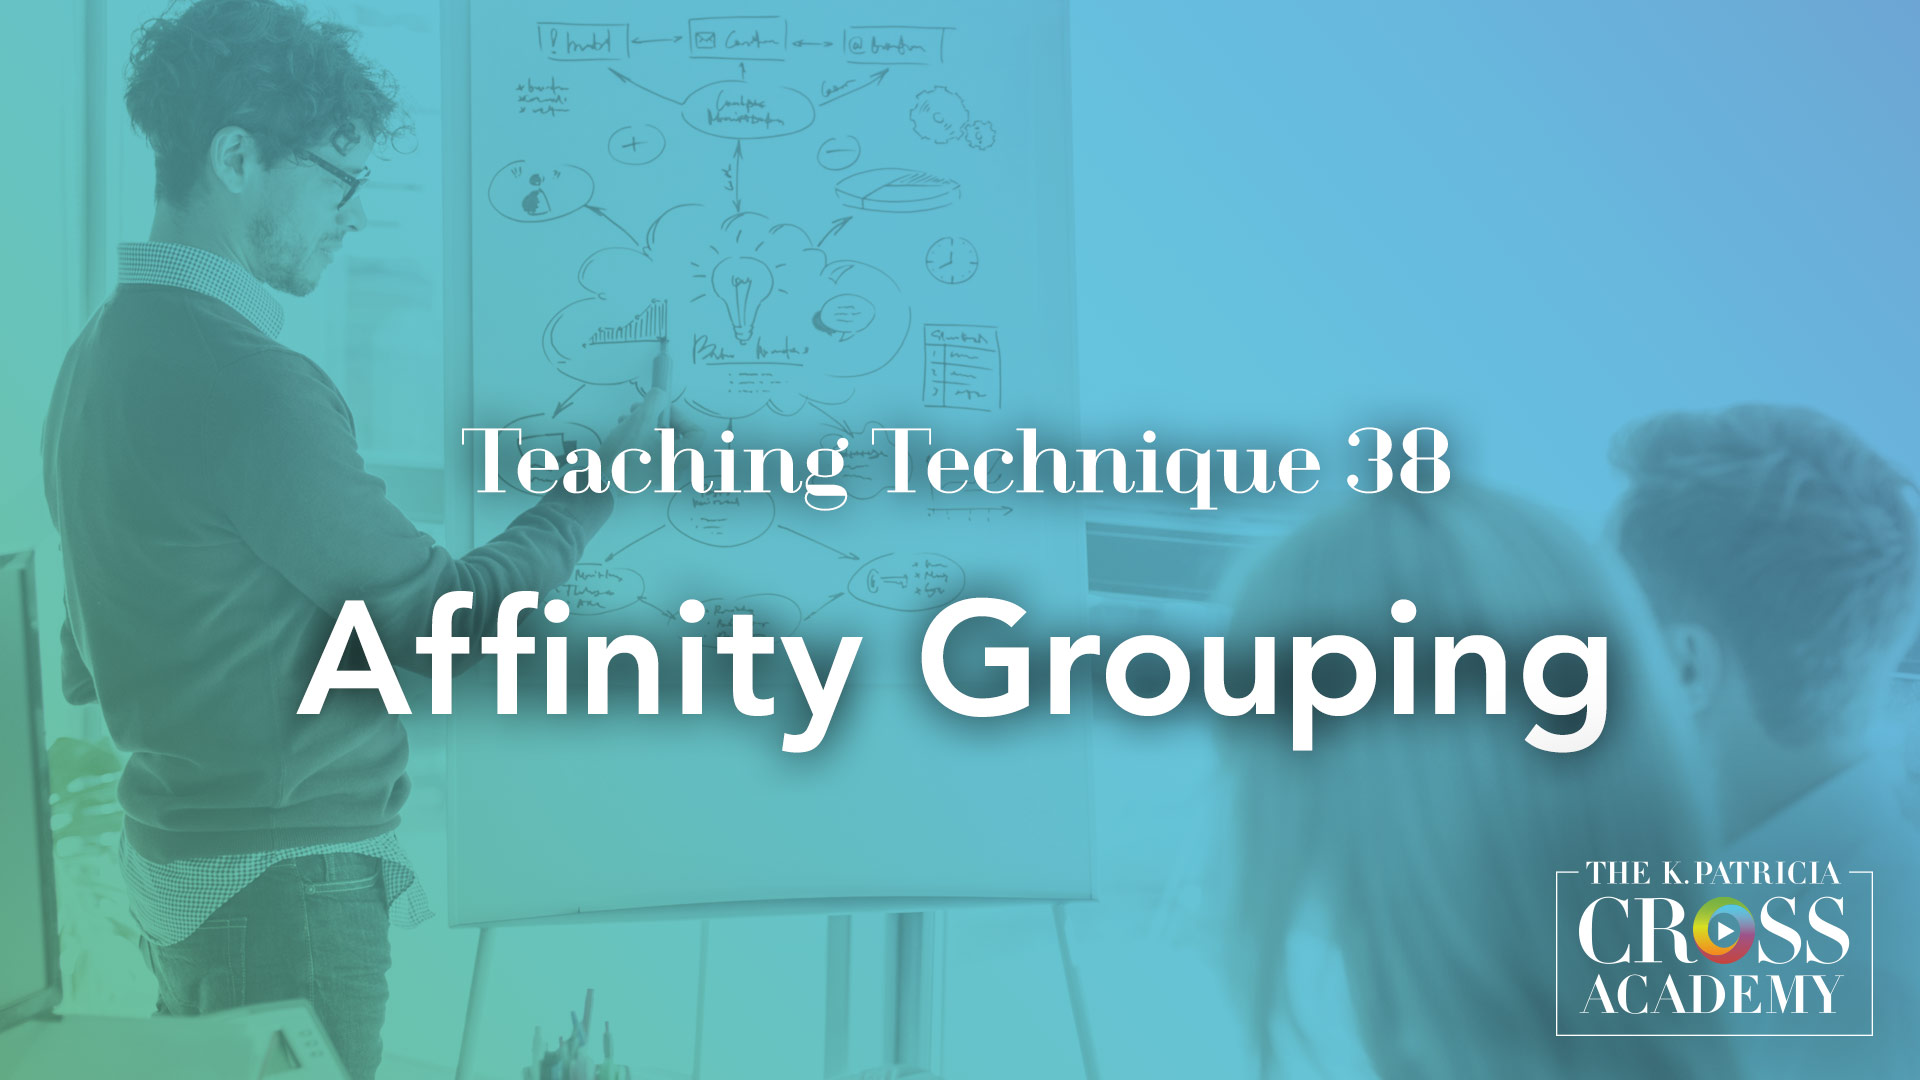 Teaching Technique 38 - Affinity Grouping